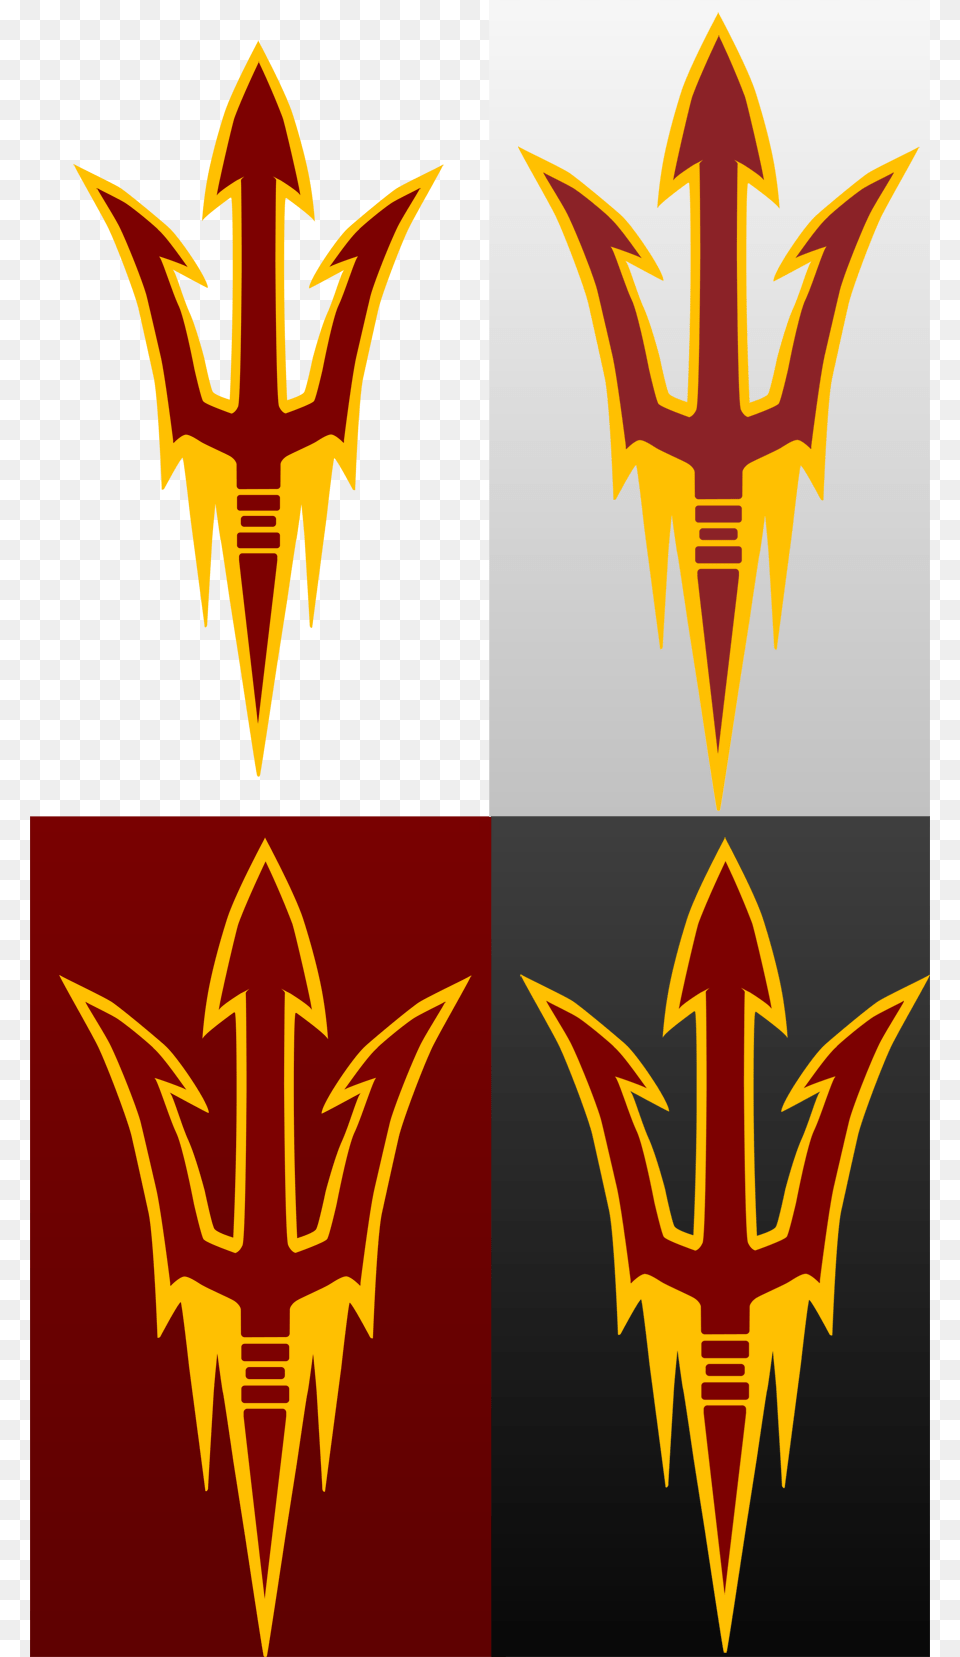 New Asu Logo By Danotomorrow On Deviant New Asu, Weapon, Trident, Dynamite Free Transparent Png